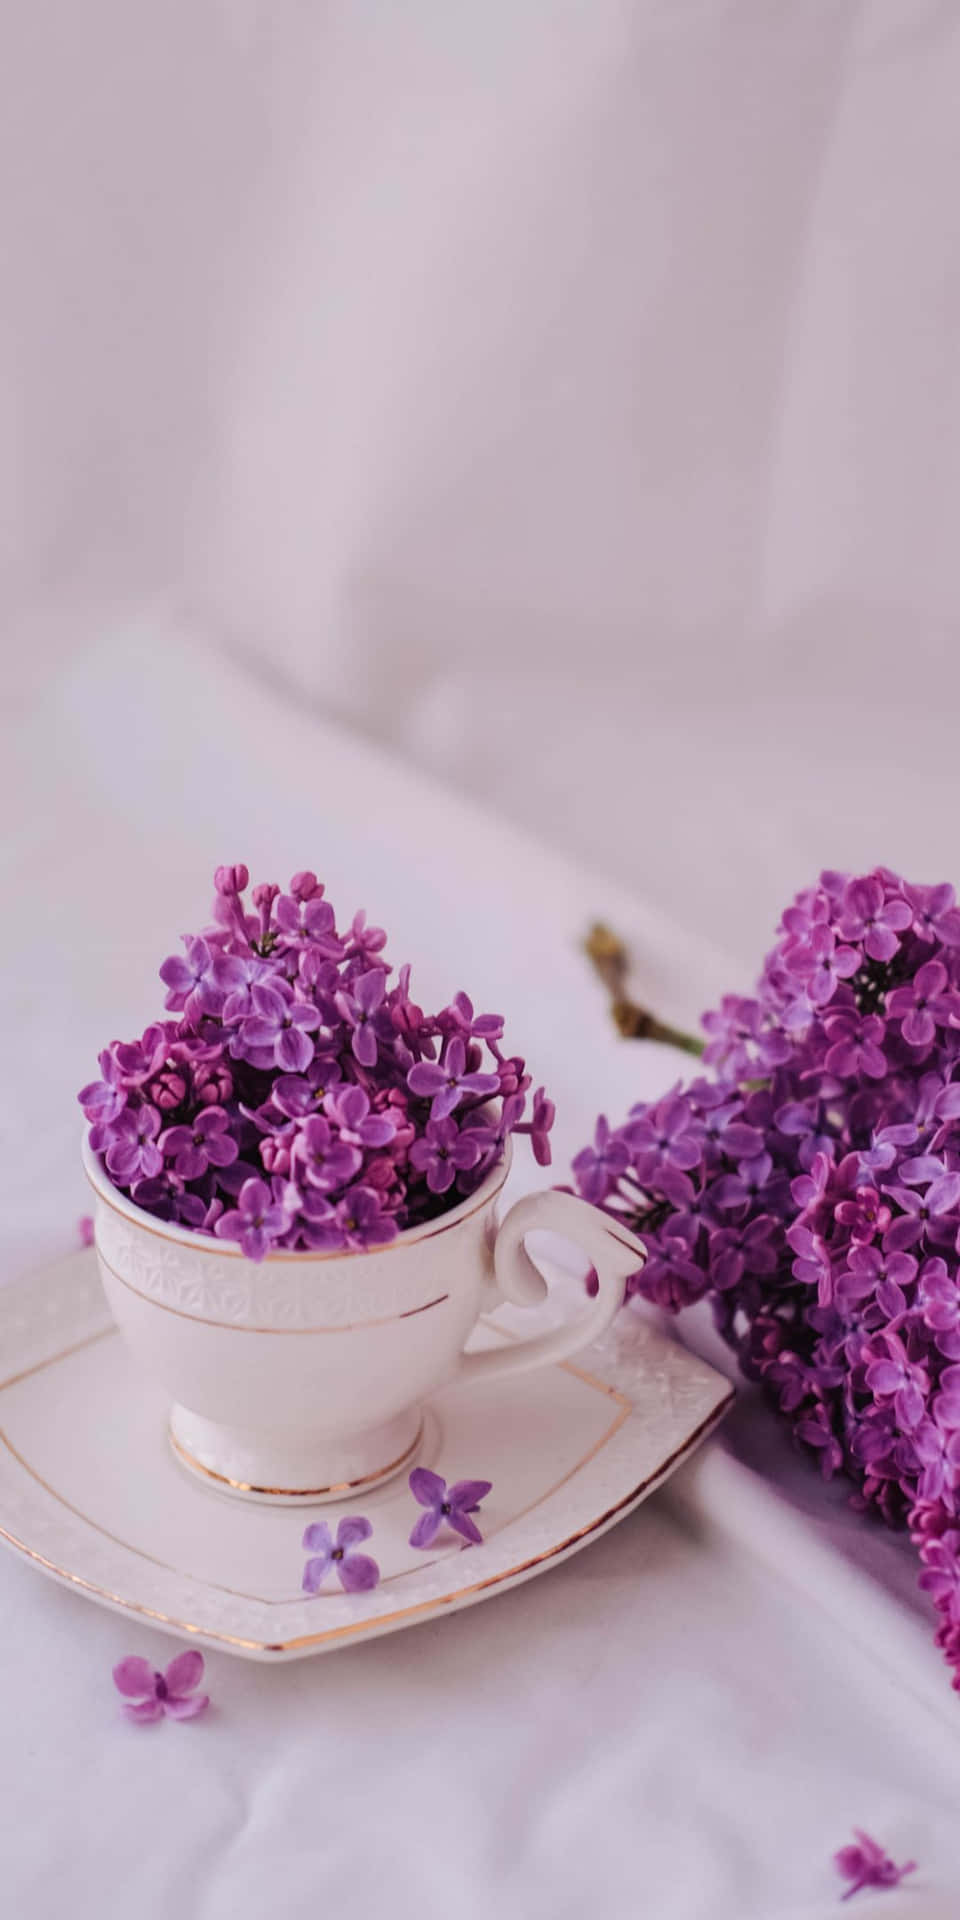 Purple Flowers On A White Table Wallpaper